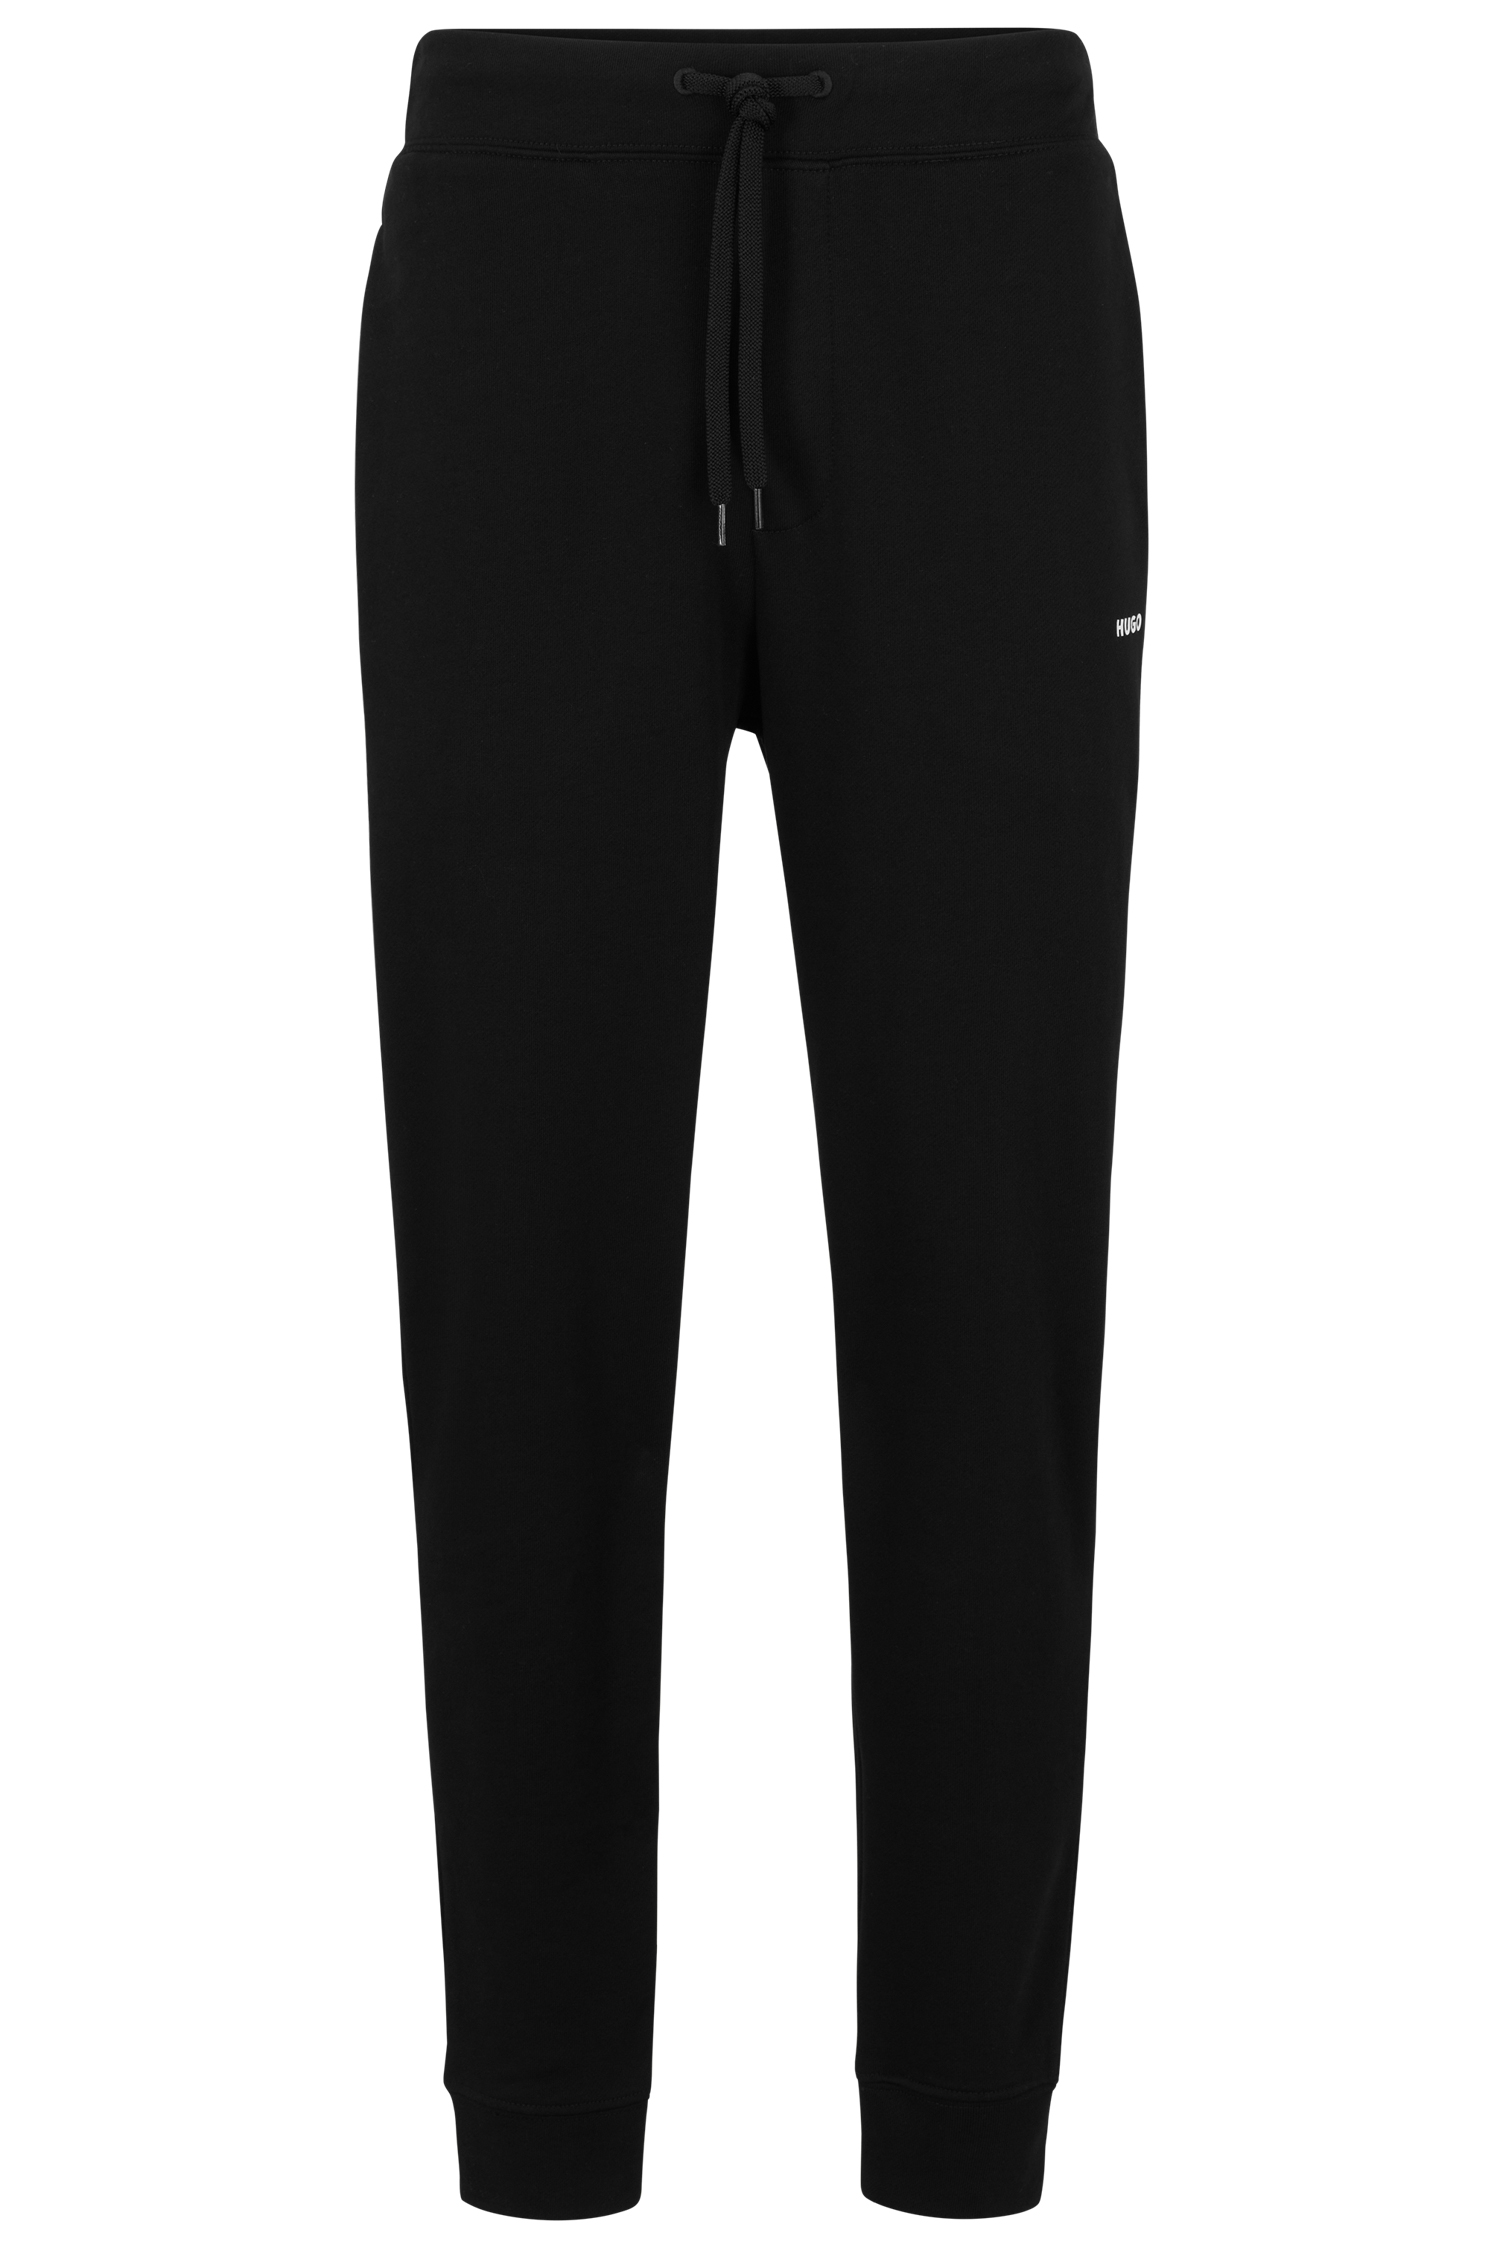 HUGO Tracksuit Bottoms Dayote232 Style | Sweatpants | Jeans & Pants ...